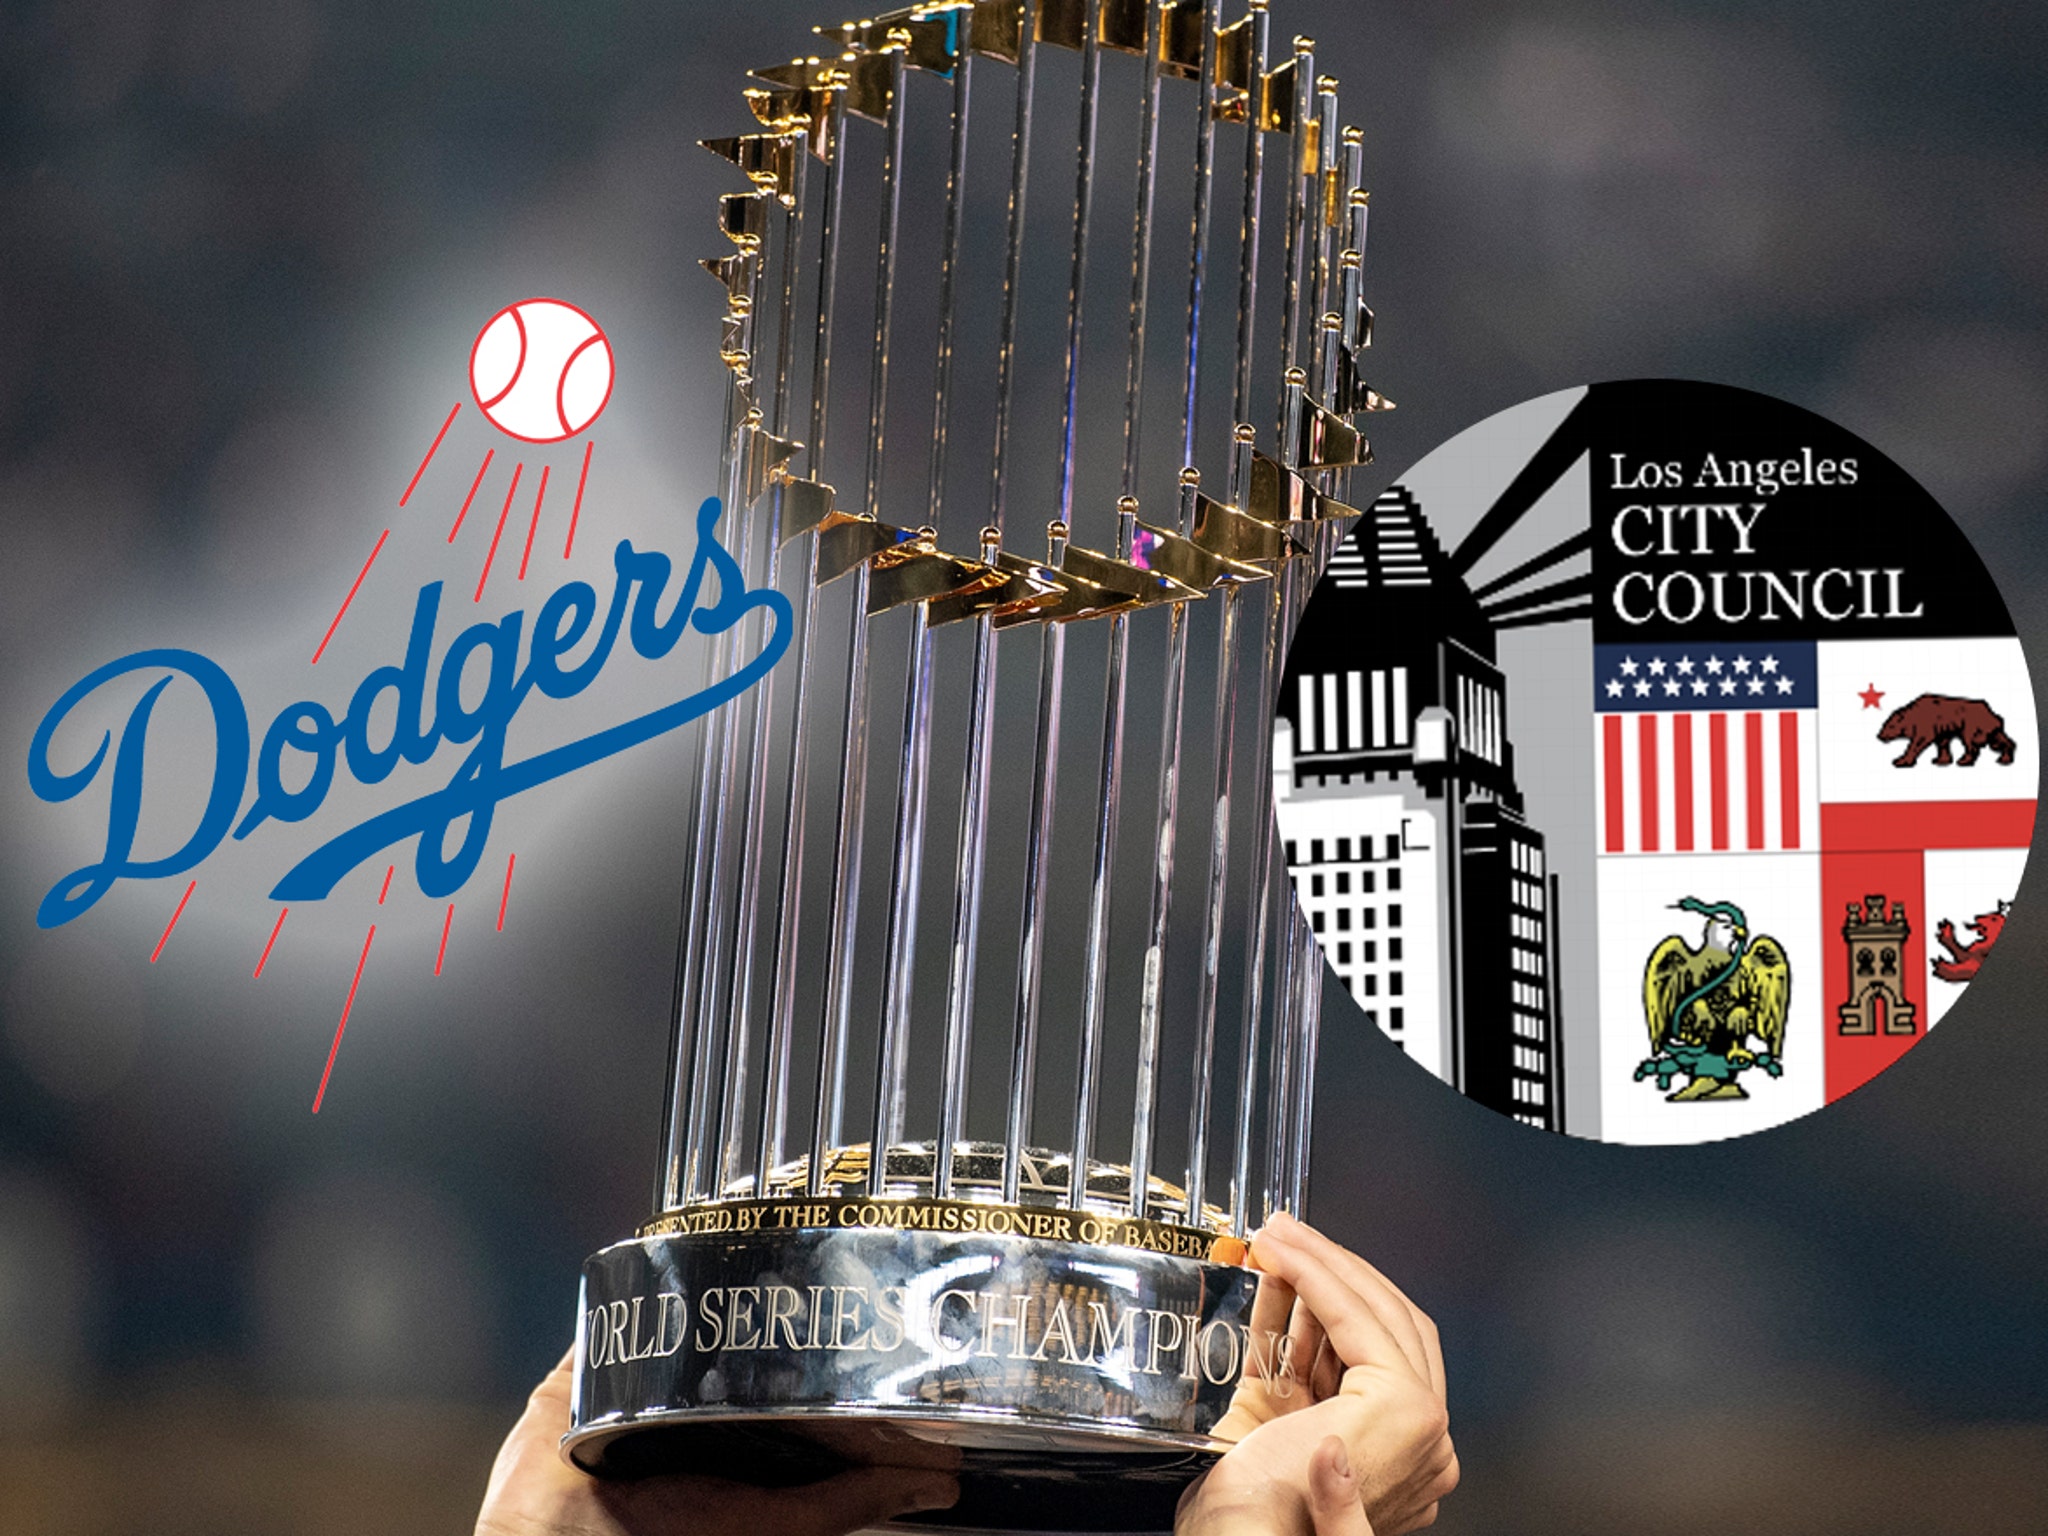 LA City Council urges MLB to award 2017, 2018 World Series titles to  Dodgers over sign-stealing scandal